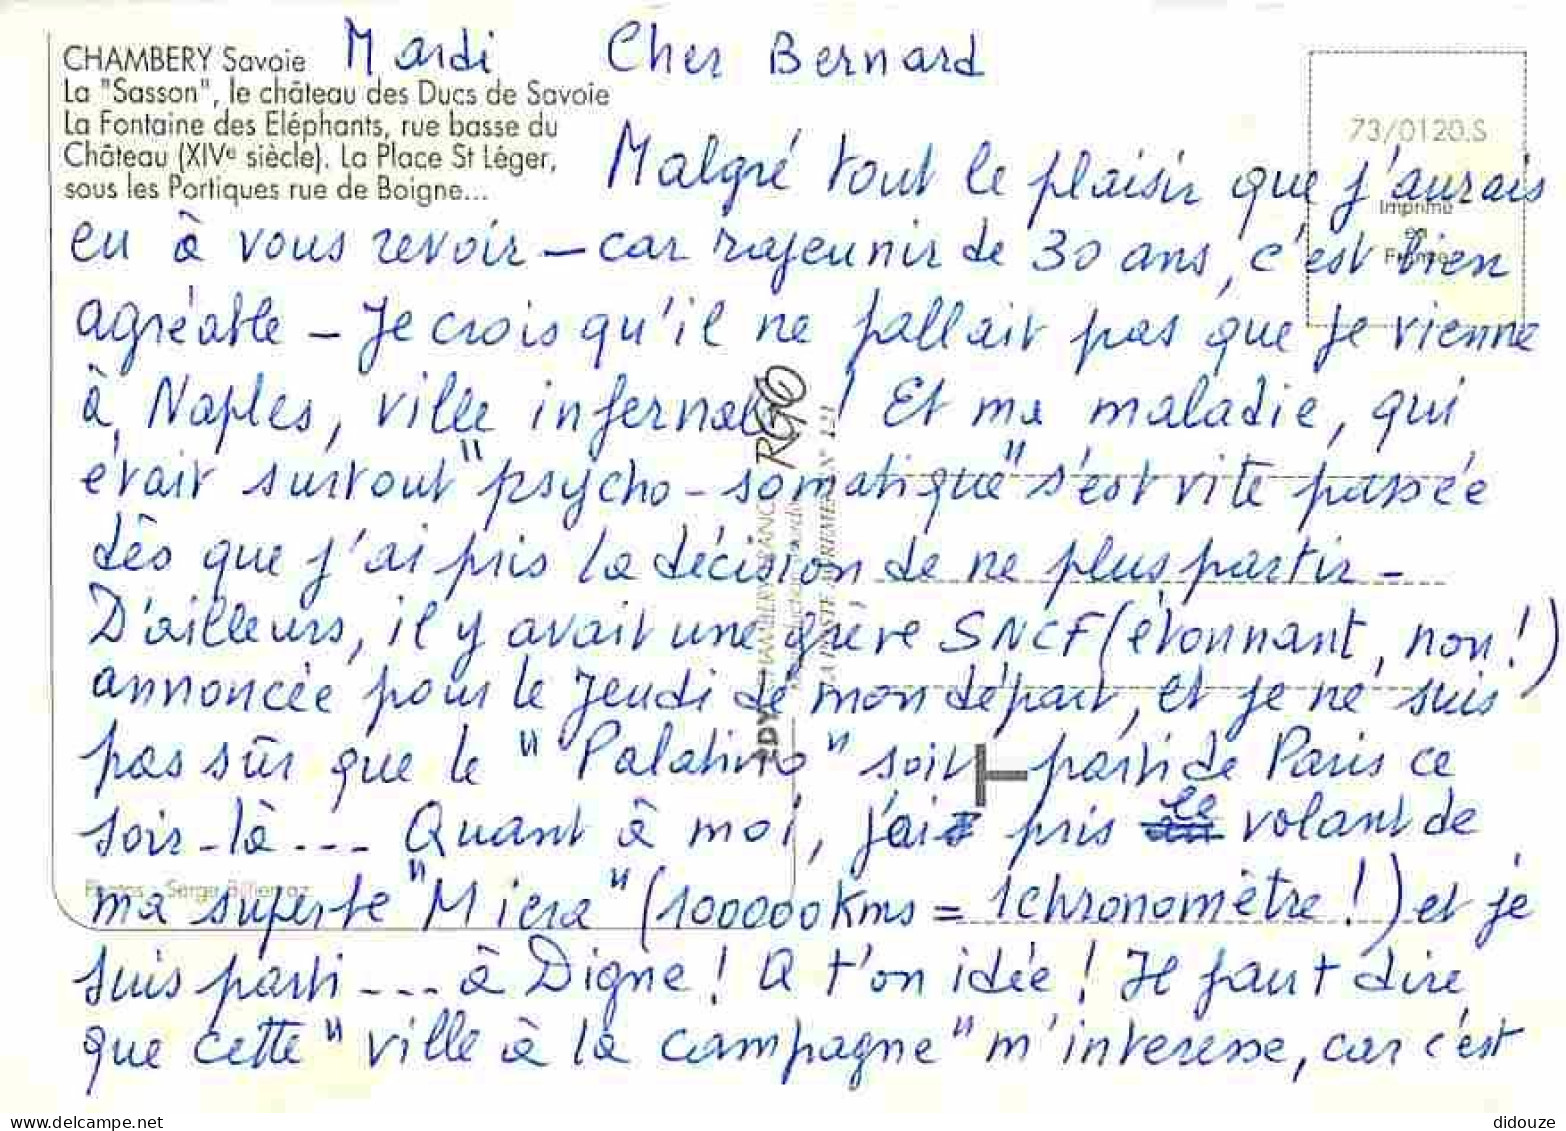 73 - Chambéry - Multivues - CPM - Voir Scans Recto-Verso - Chambery